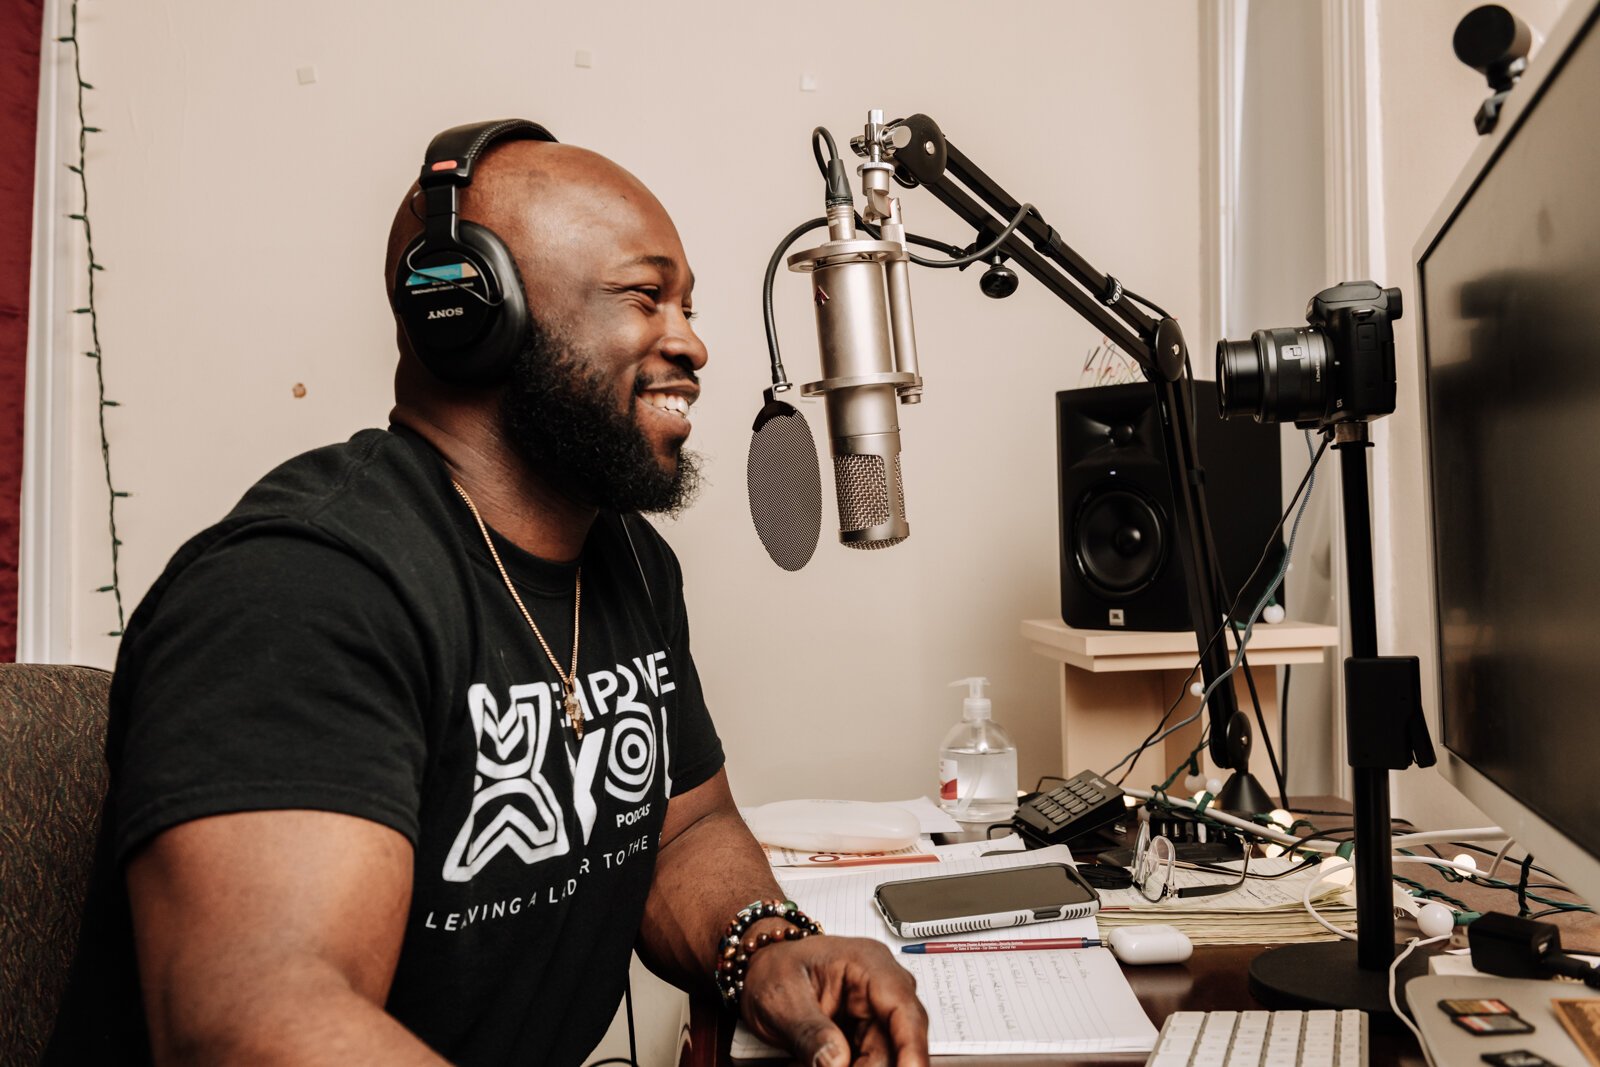 Kibwe Cooper, the host of 'Empower You Podcast', works on a podcast in his studio at home.